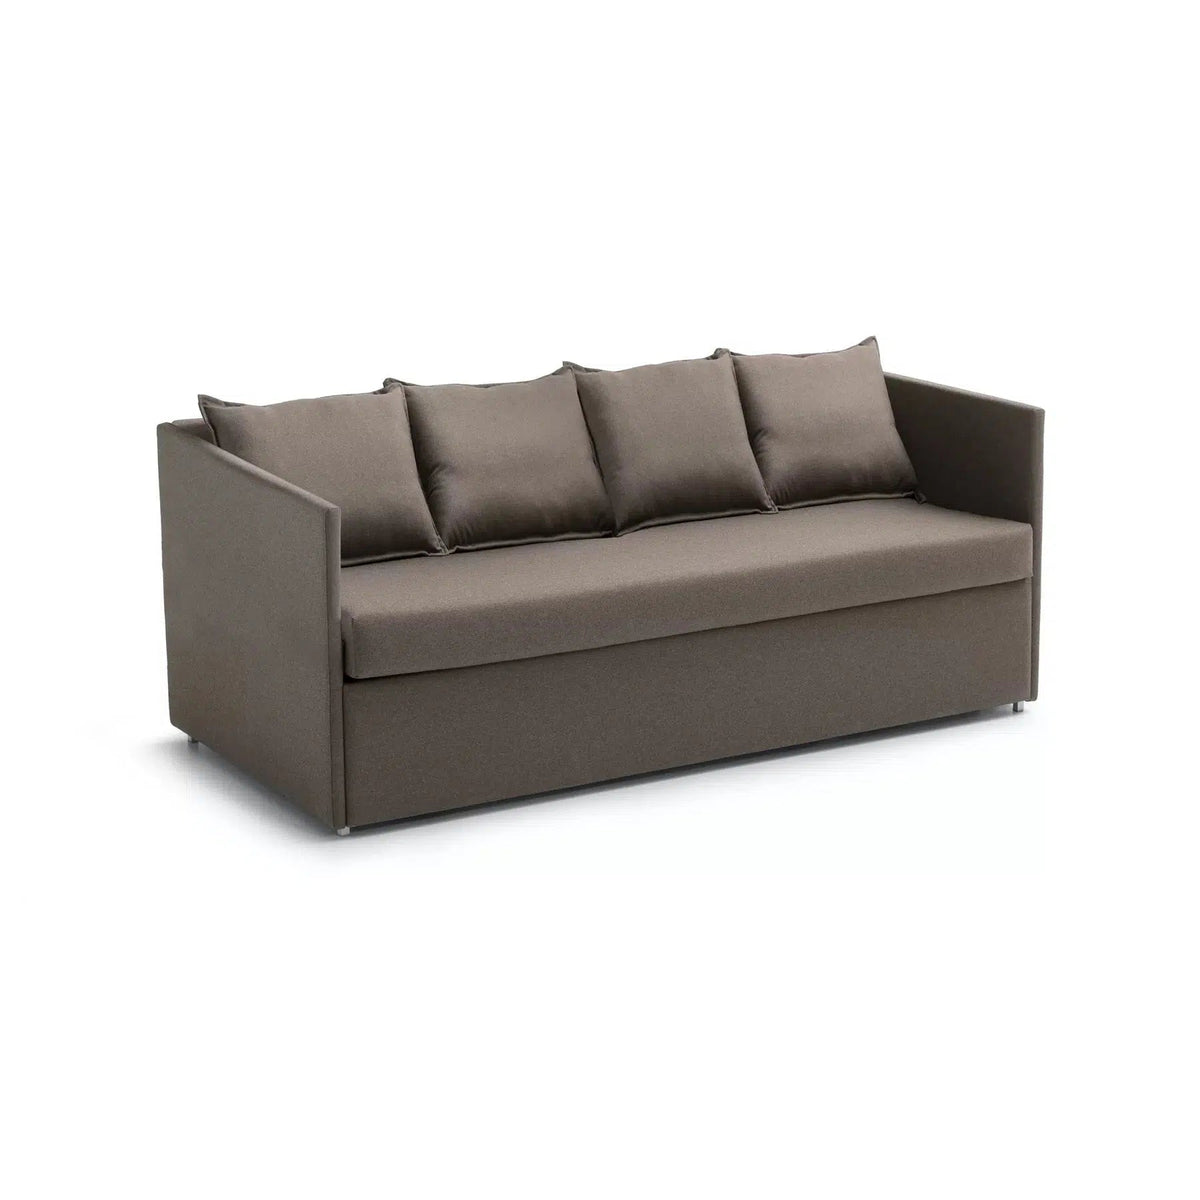 Naxos 960 Sofa Bed-TM Leader-Contract Furniture Store